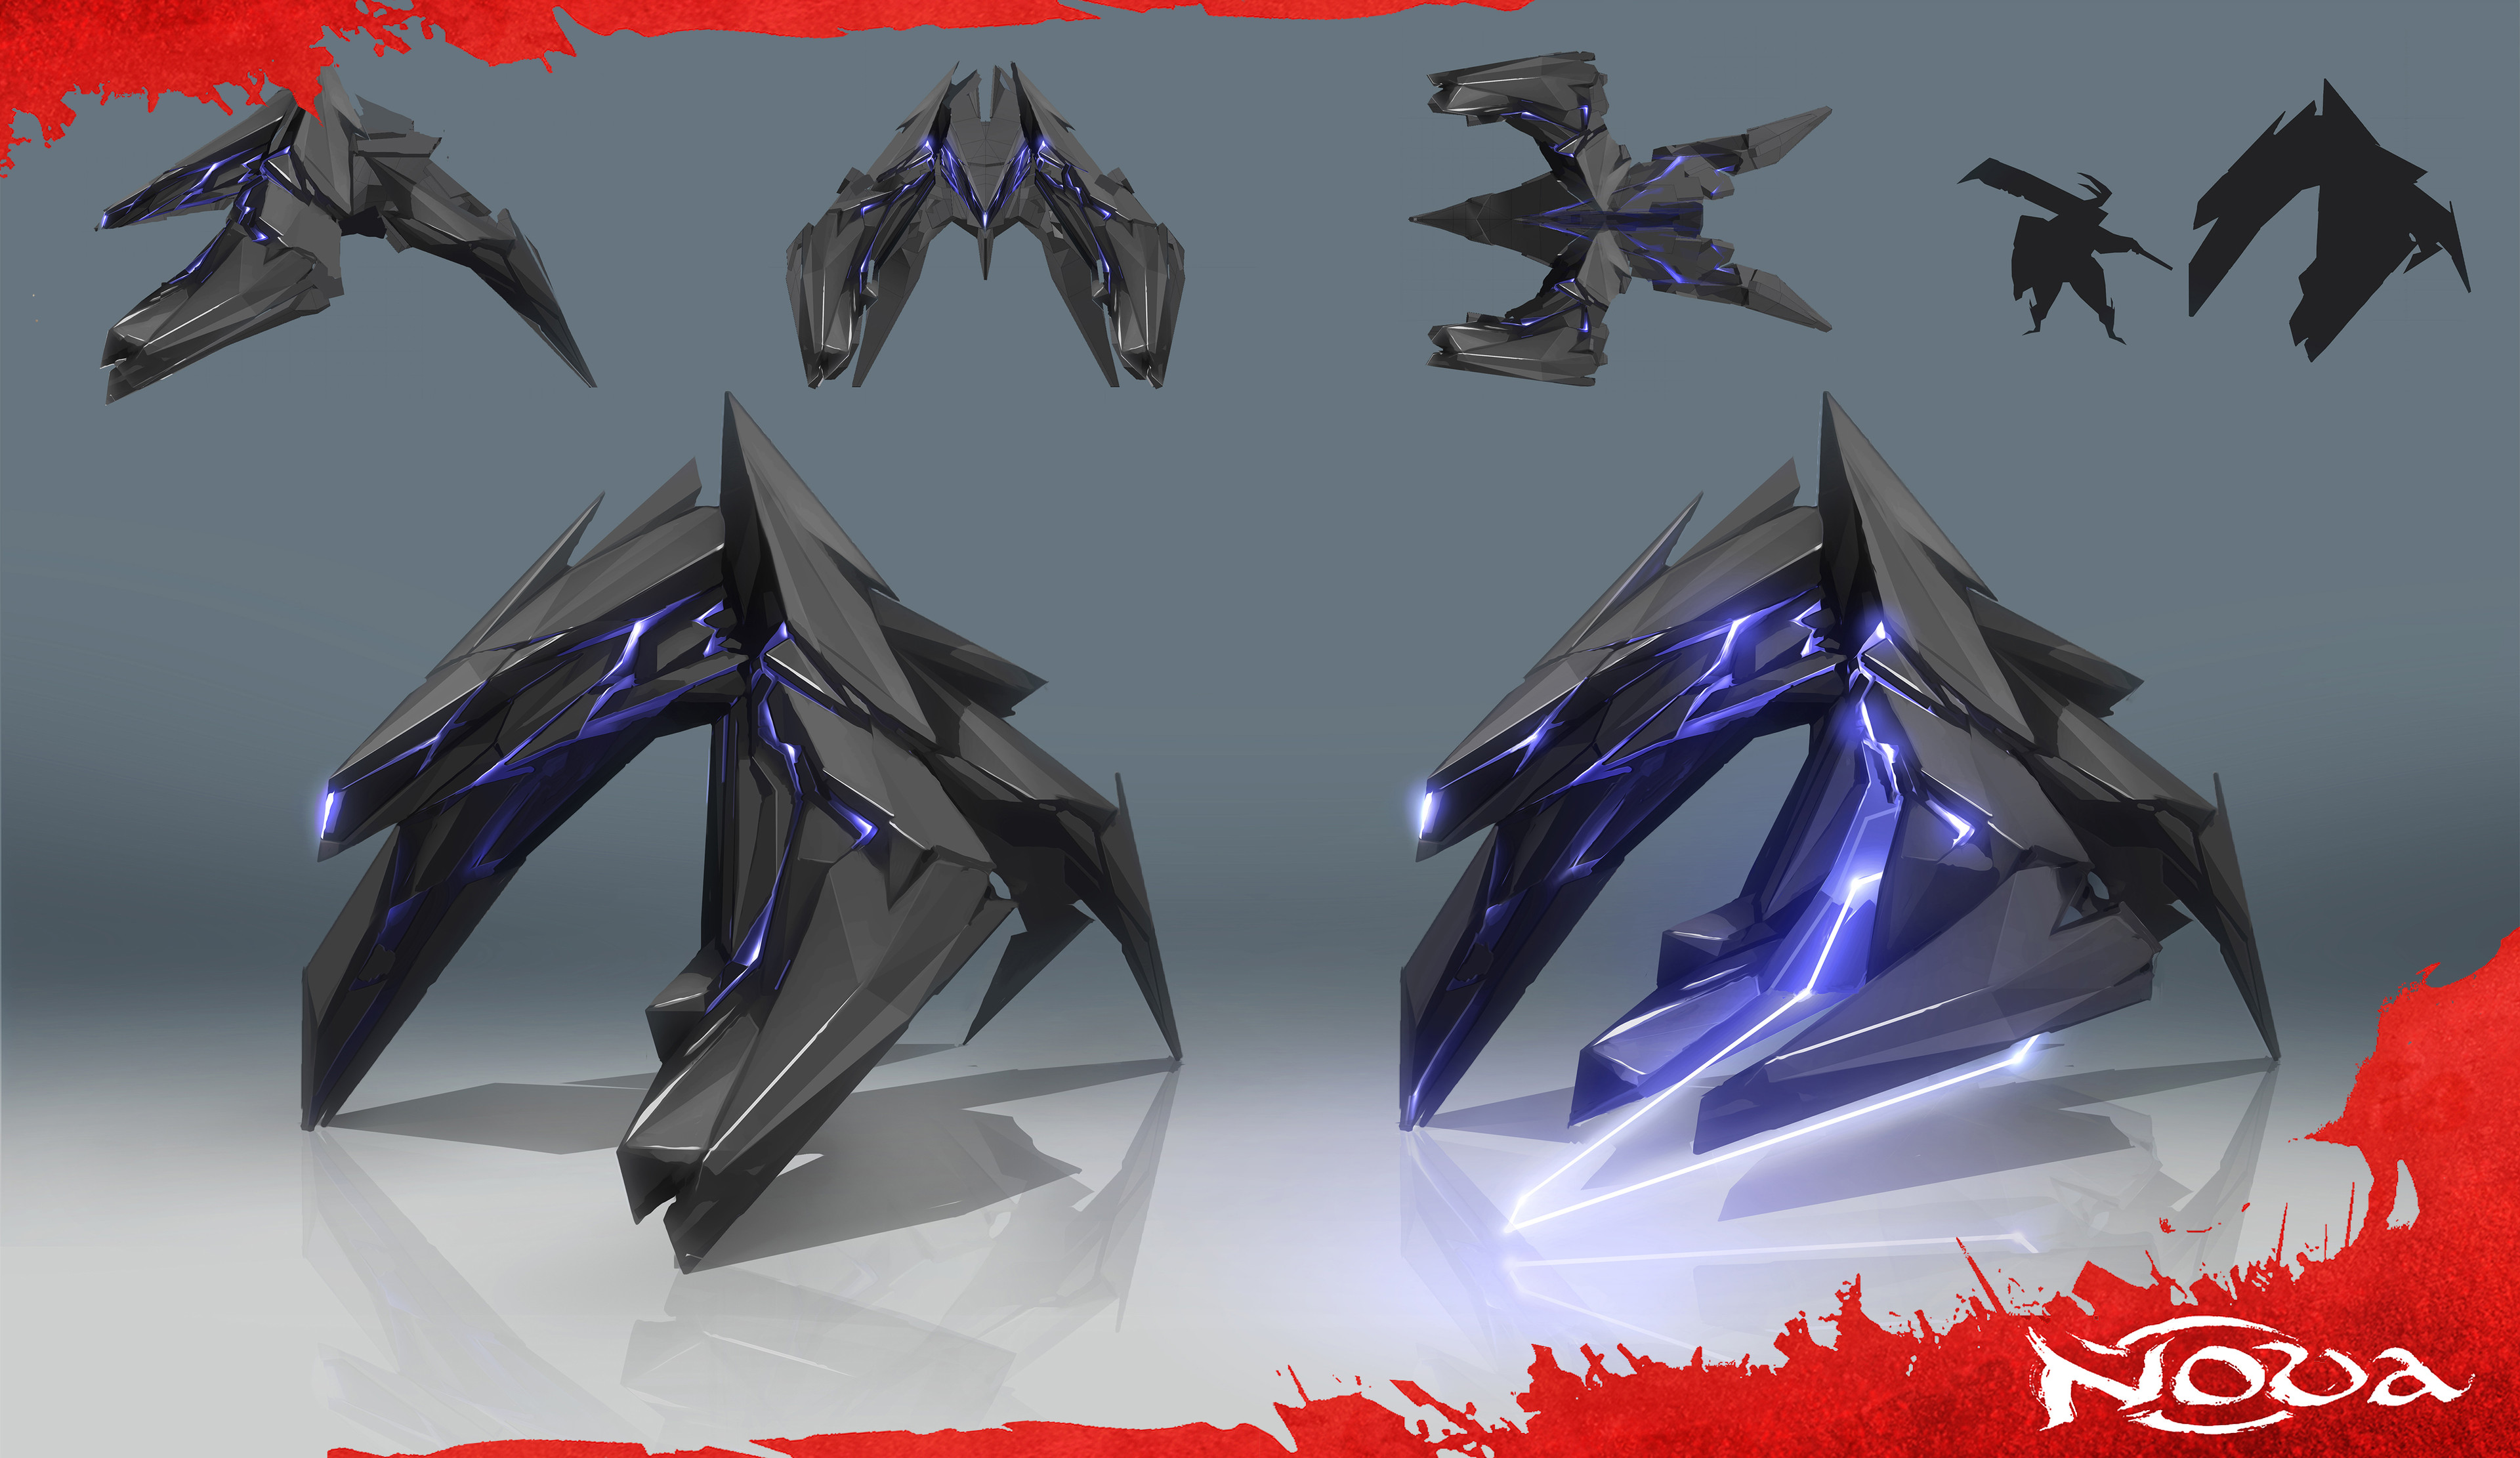 The Sentinel is another Daxx character. The look of the Daxx was inspired by 3D fractals with an onyx finish.